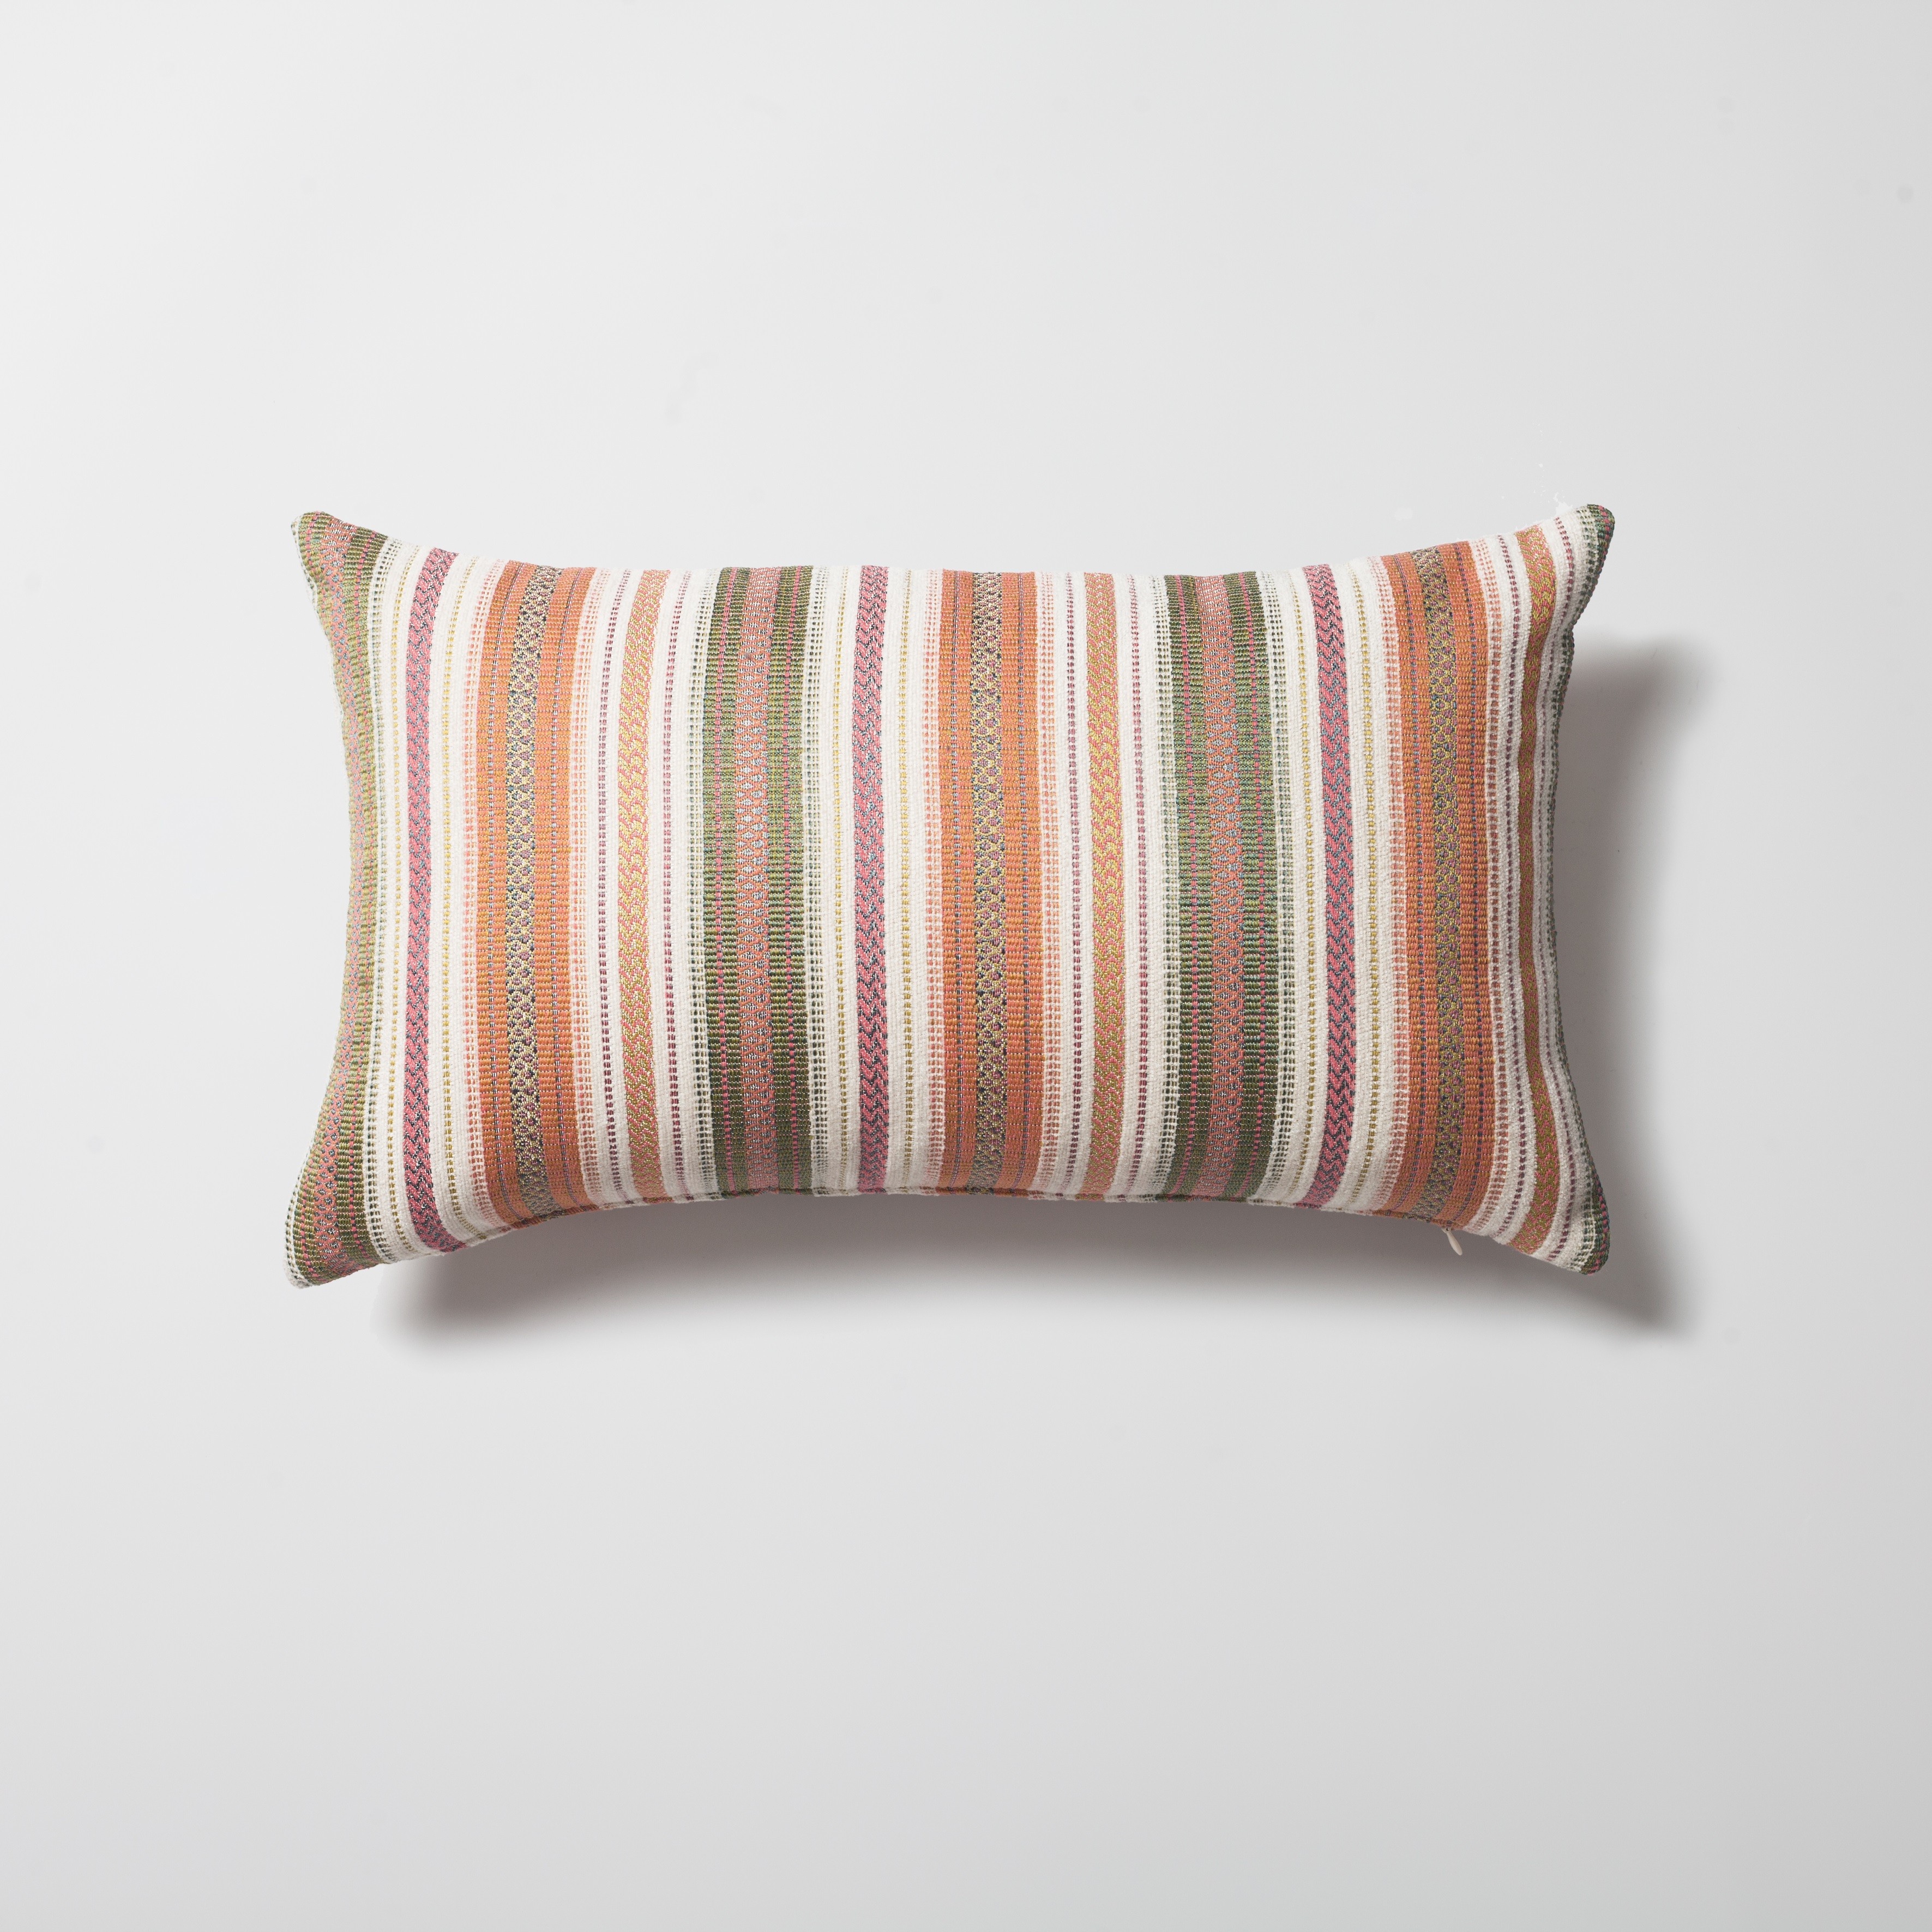 "Boho" - Striped Ethnic Motif Patterned Cushion 12x20 Inch - Orange (Cover Only)